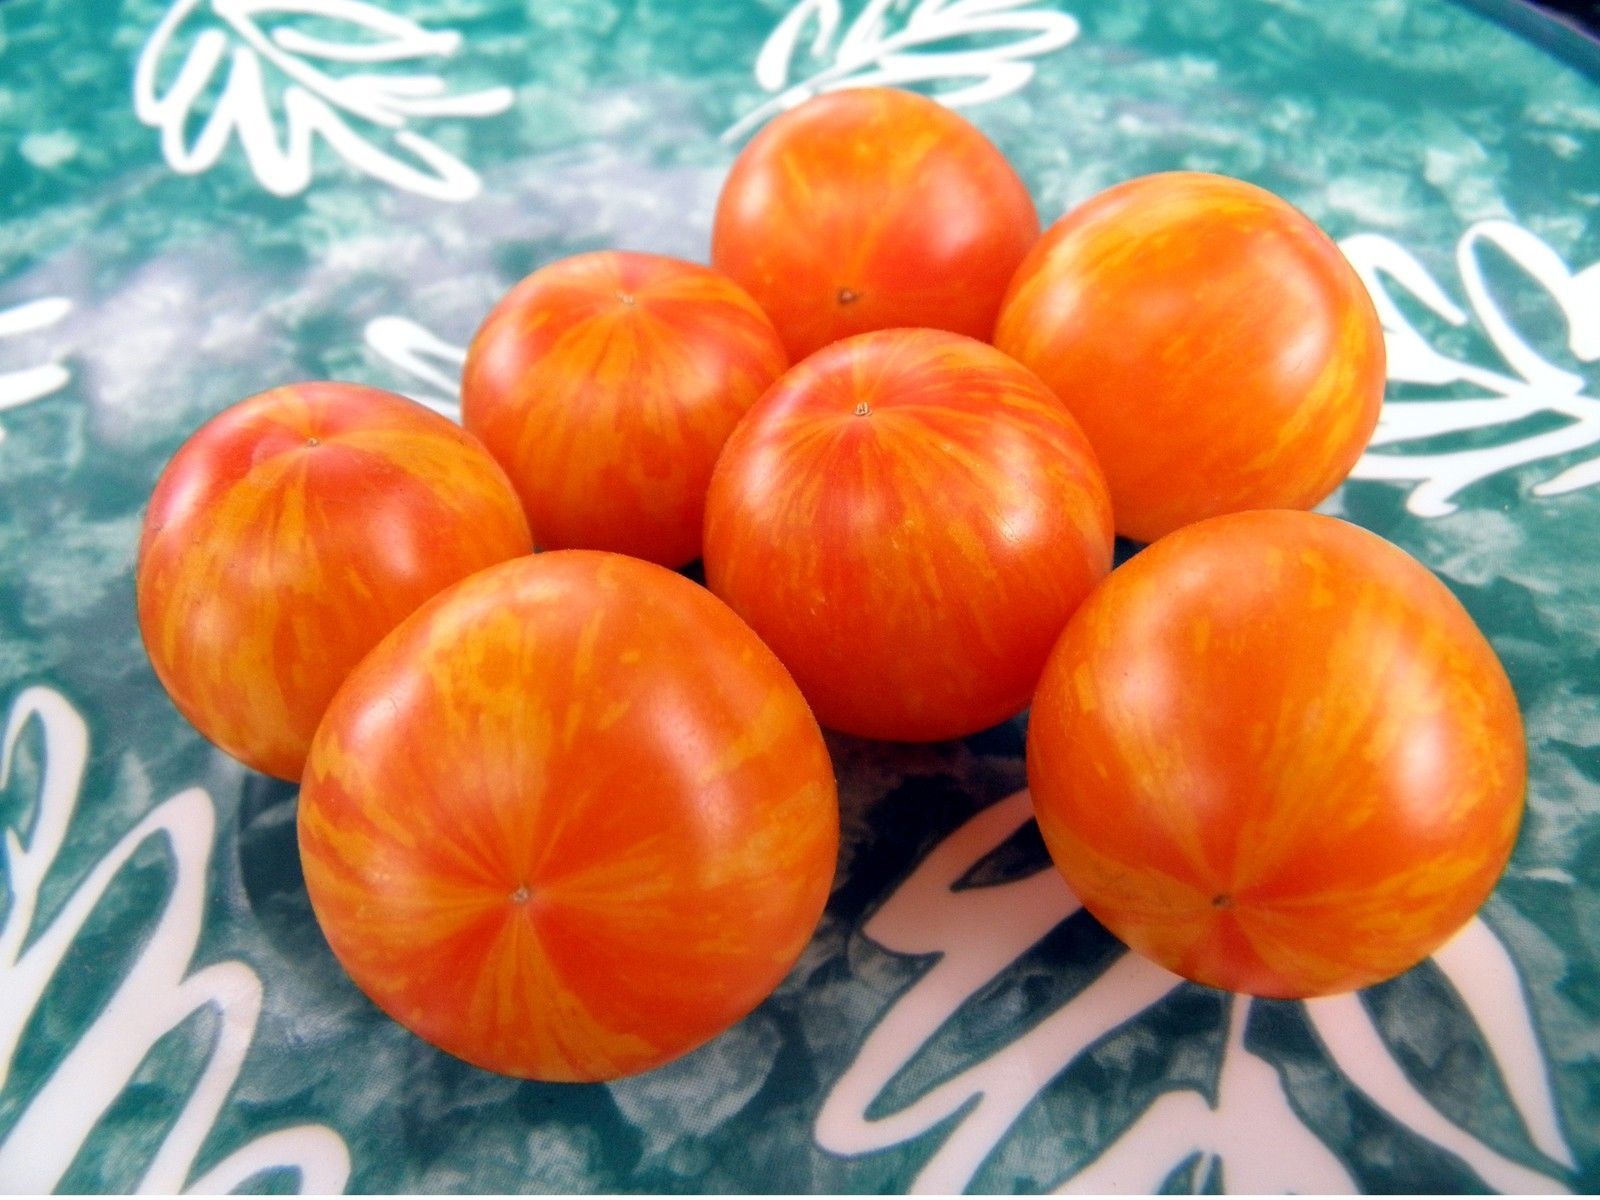 Primary image for Starfire Isis - Perhaps the world's most beautiful cherry tomato, J&L variety